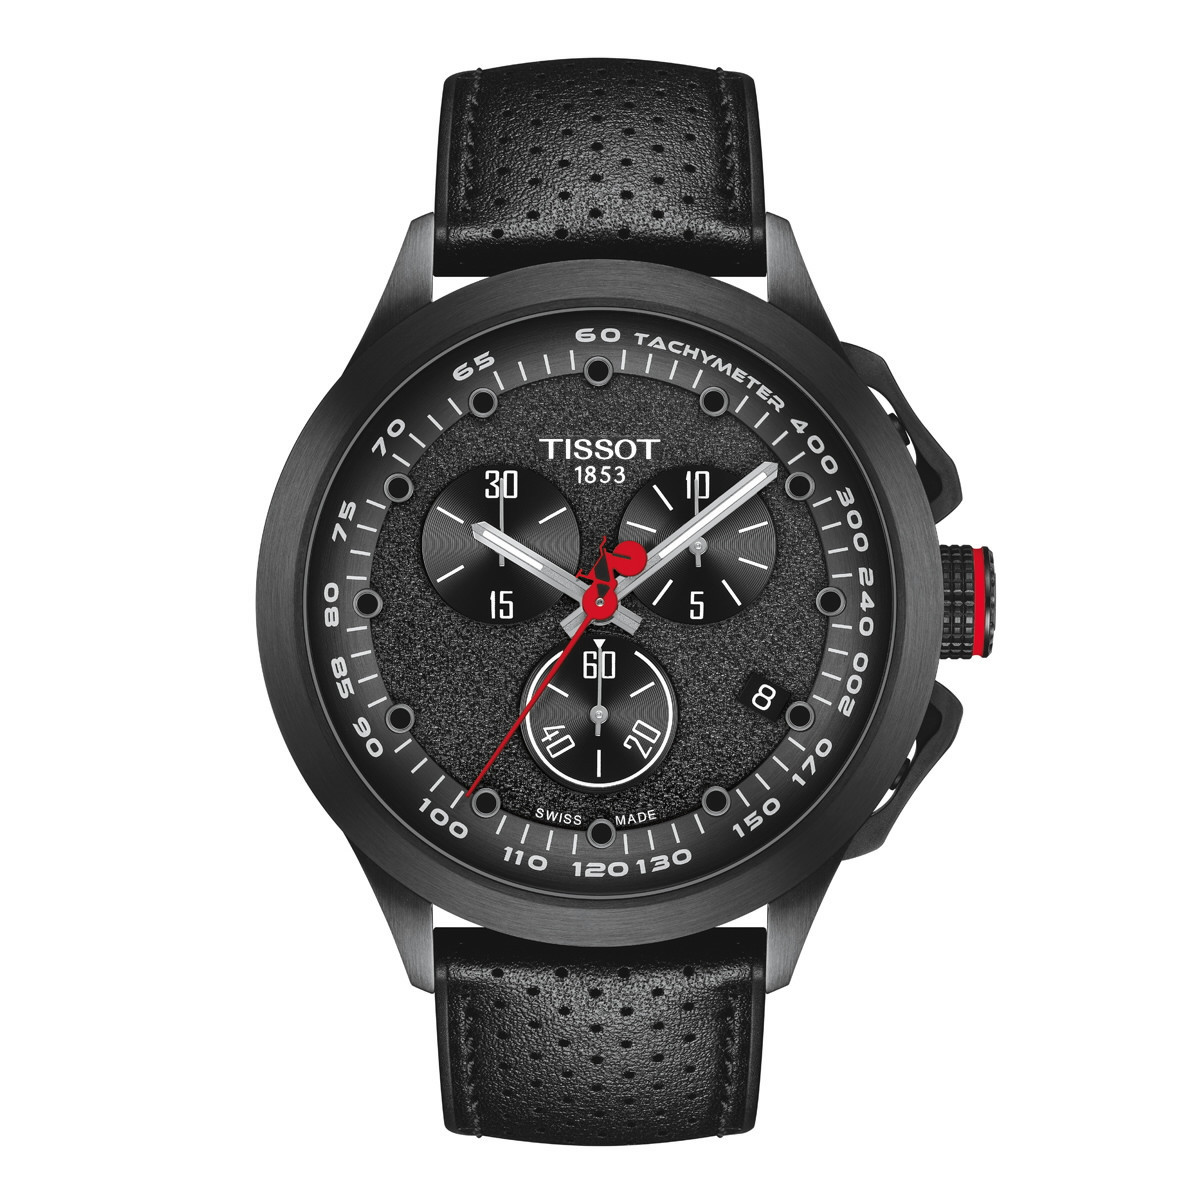 TISSOT T-RACE CYCLING VUELTA 2022 SPECIAL EDITION